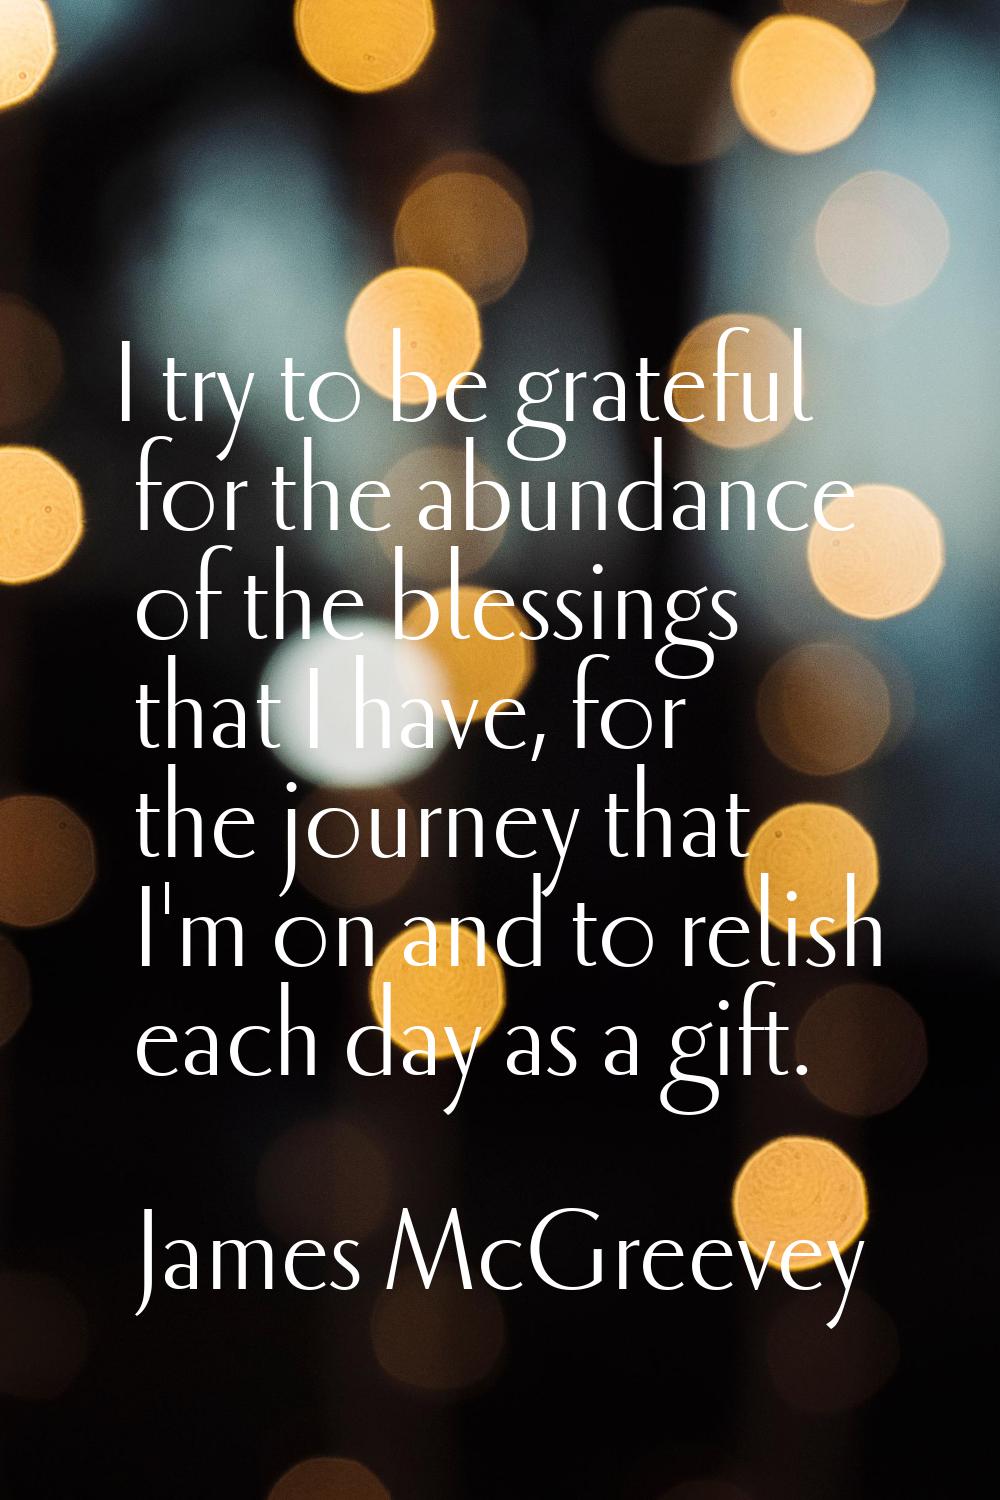 I try to be grateful for the abundance of the blessings that I have, for the journey that I'm on an